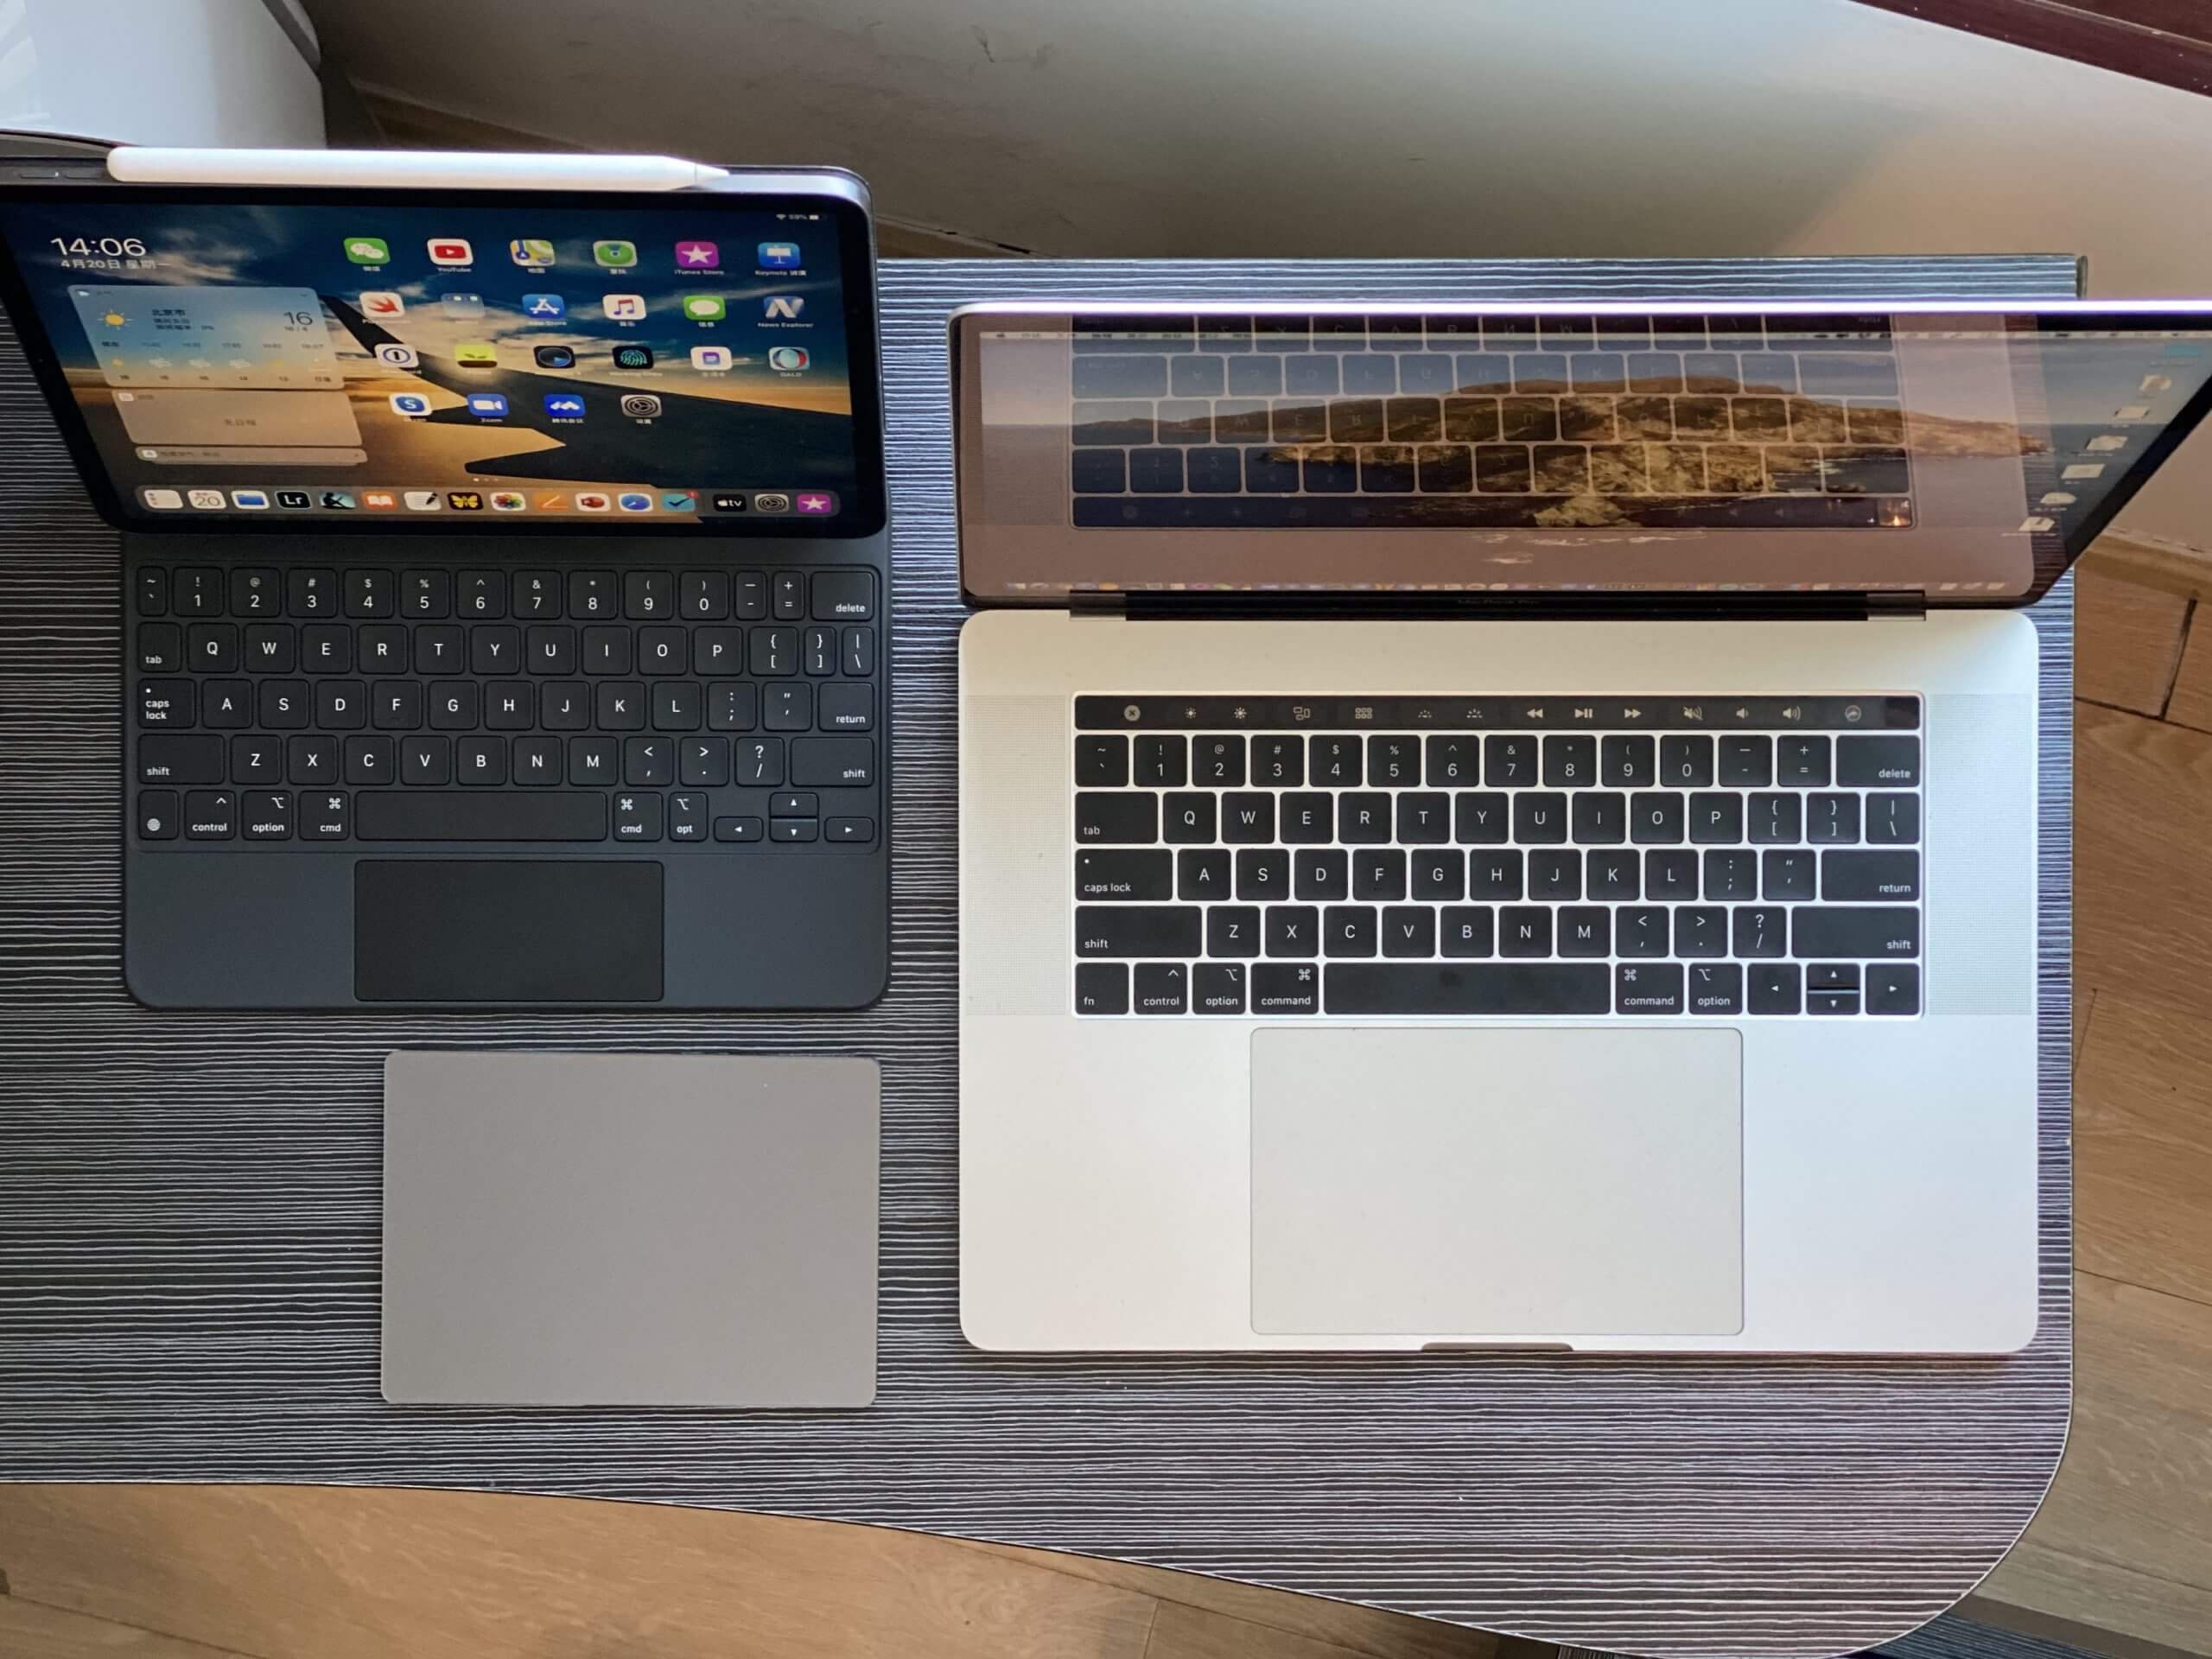 Comparison with 15-inch MacBook Pro and Magic Trackpad for Mac (unmarked)